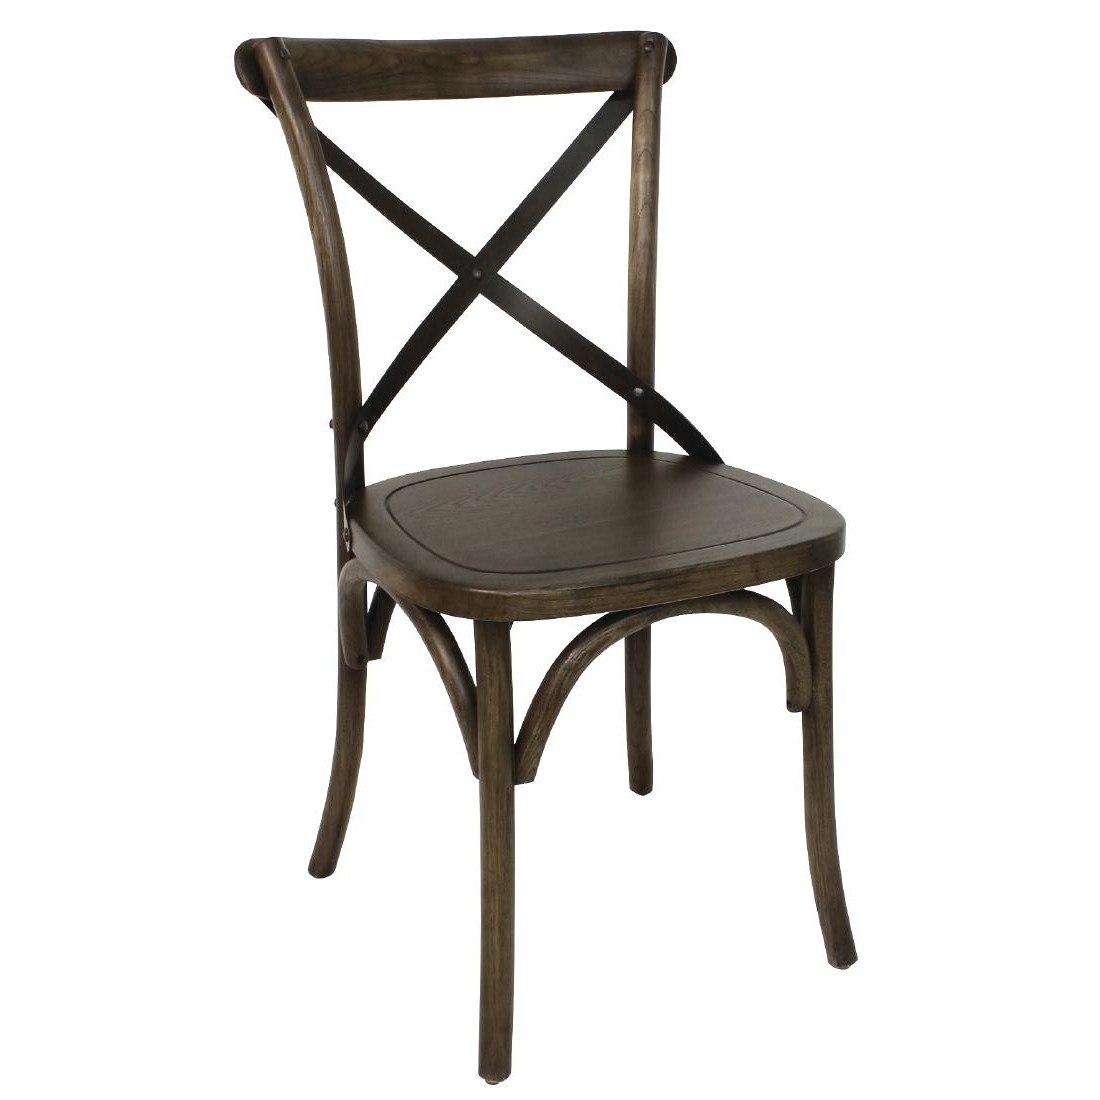 Bolero Wooden Dining Chair with Metal Cross Backrest